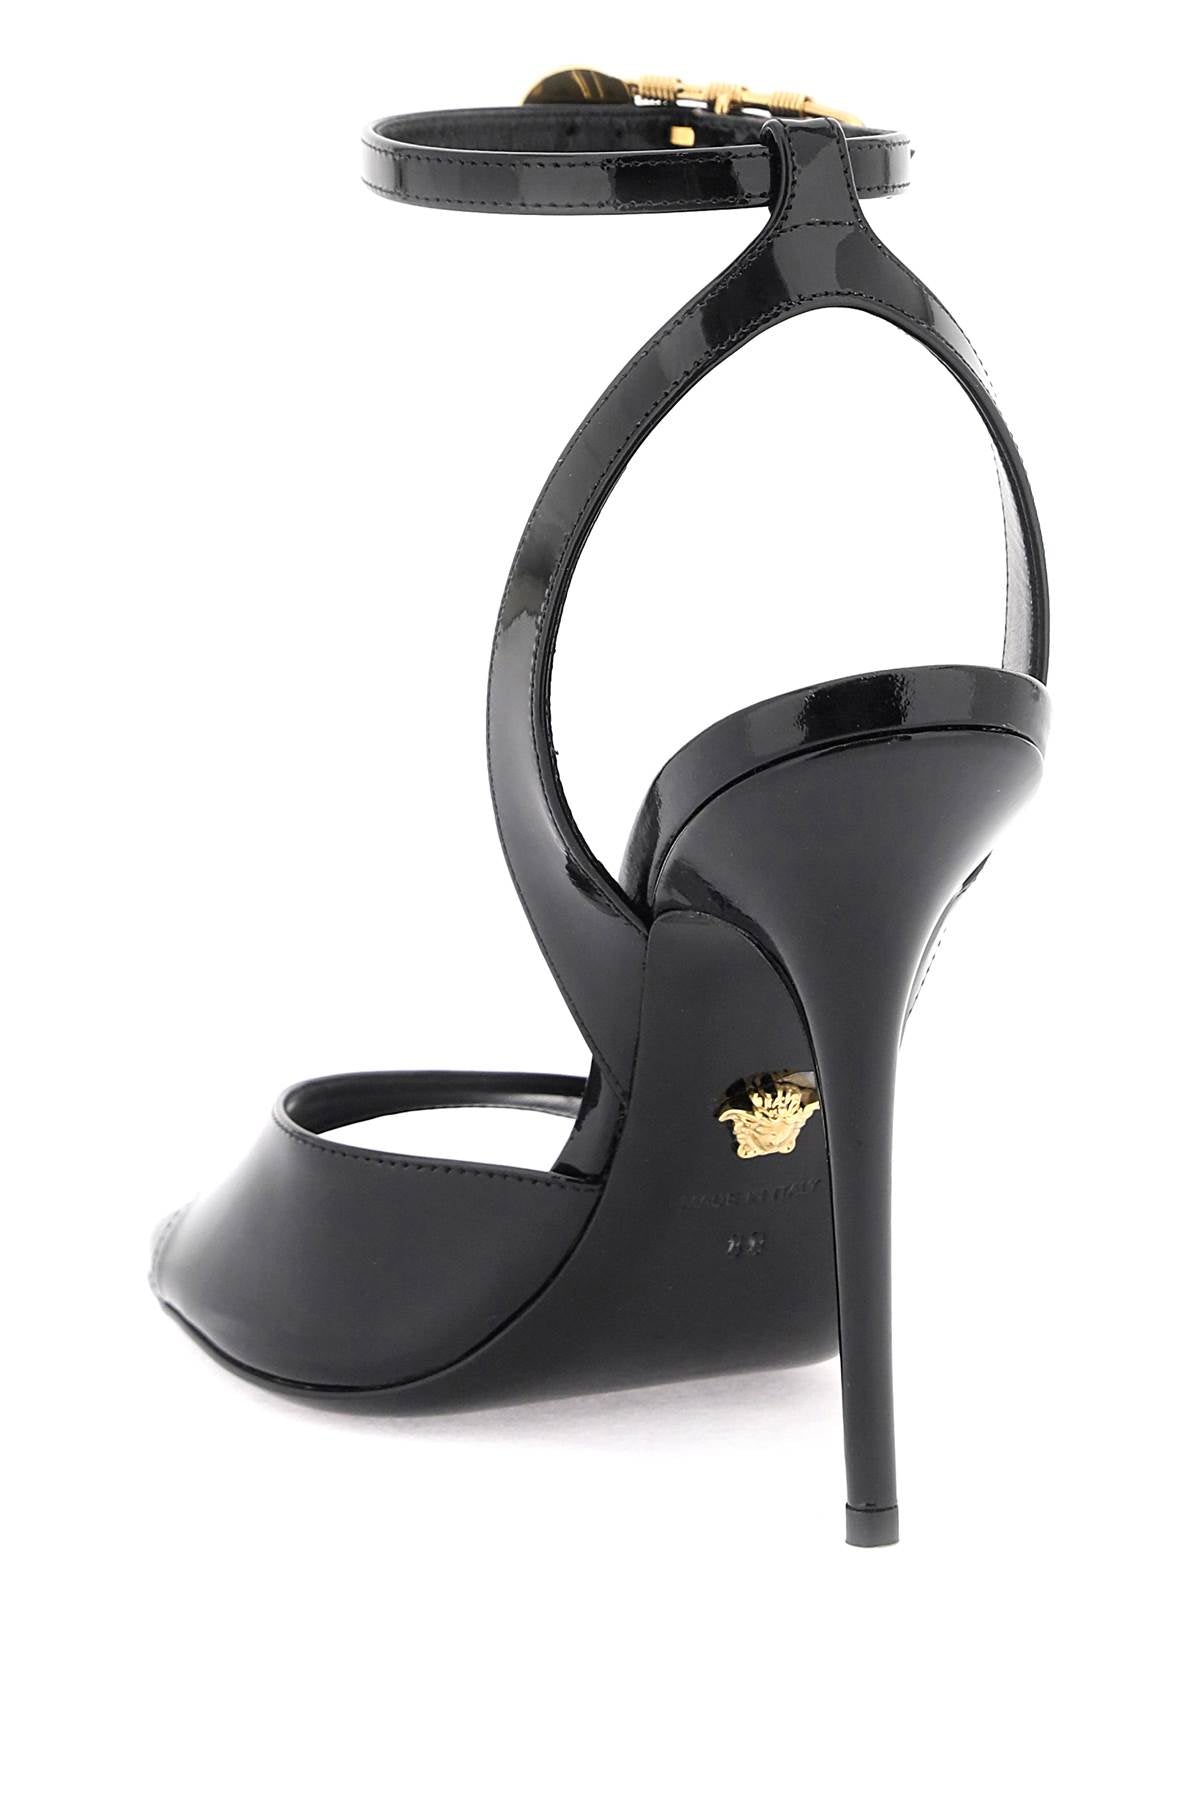 Versace Versace 'safety pin' patent leather sandals